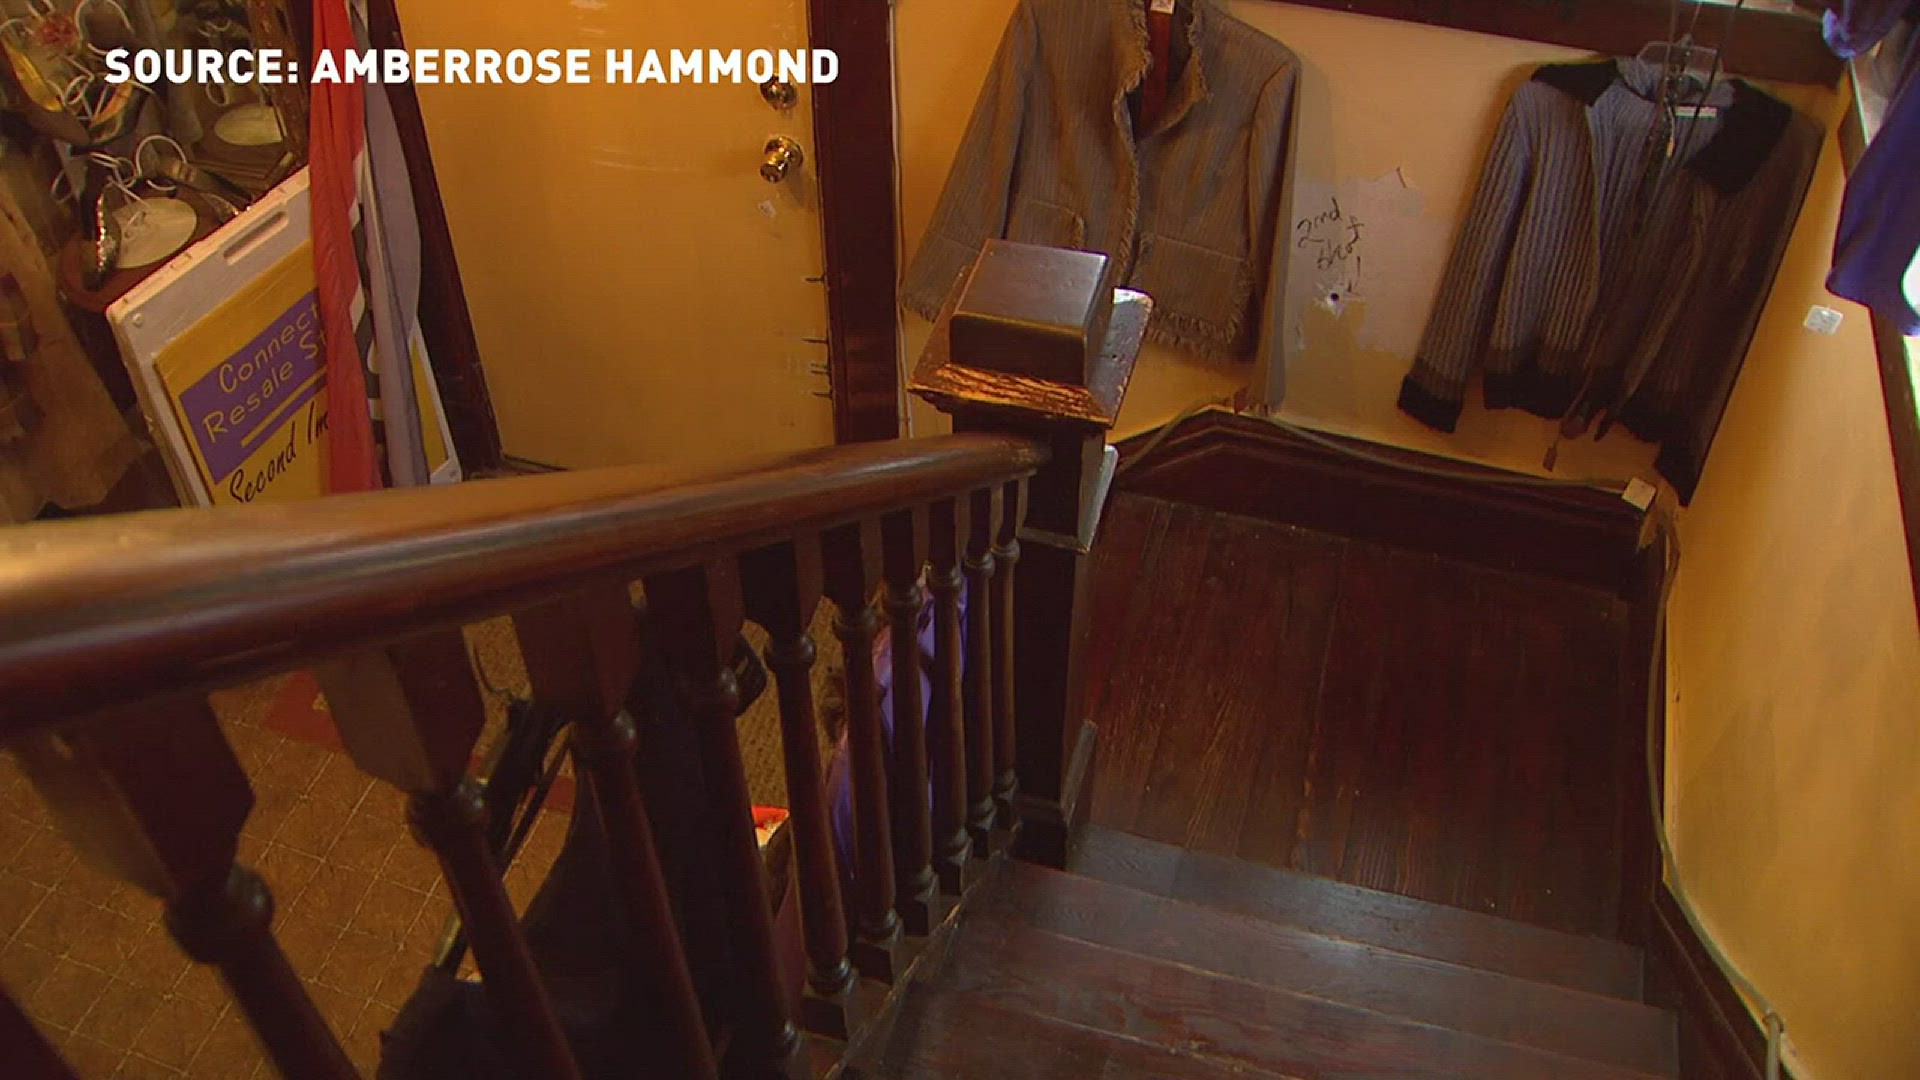 Paranormal author and investigator Amberrose Hammond was given permission to perform an investigation inside Second Impression consignment shop. She picked up an EVP (Electronic Voice Phenomenon). “You hear a voice say, ‘I’m not happy; I’m not happy; I’m not happy. Help me,’” claims Hammond.